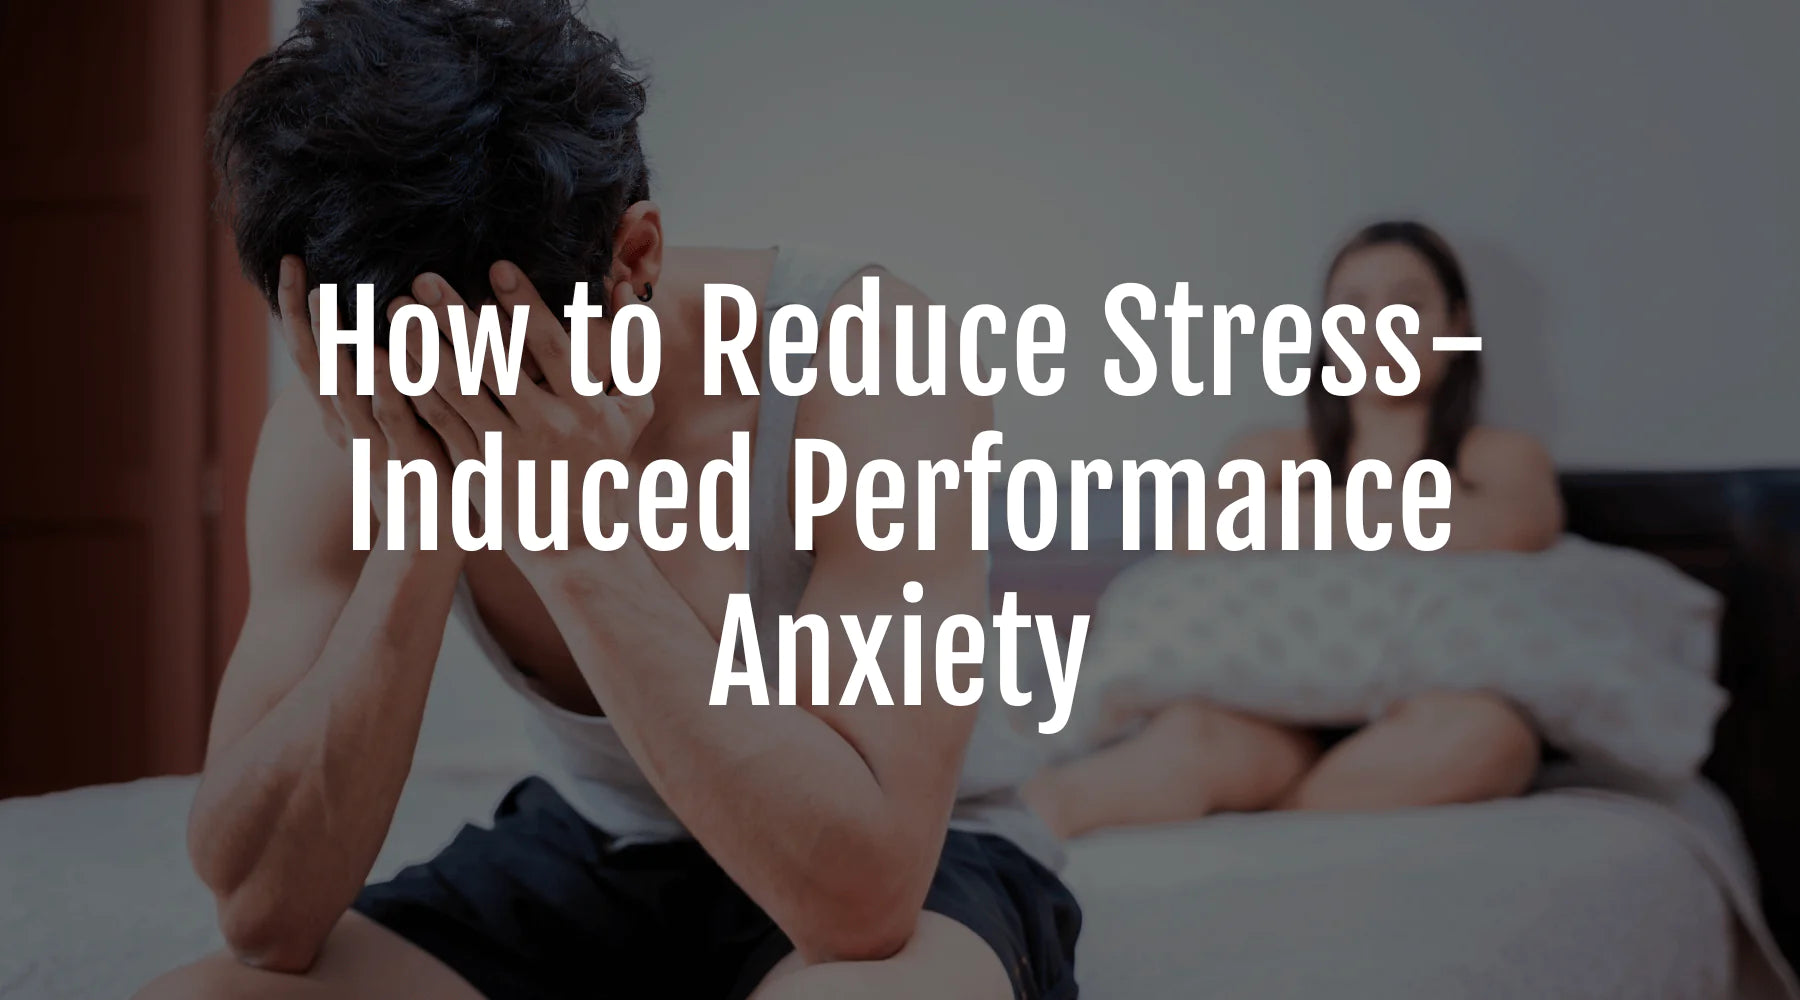 How To Reduce Stress-Induced Performance Anxiety